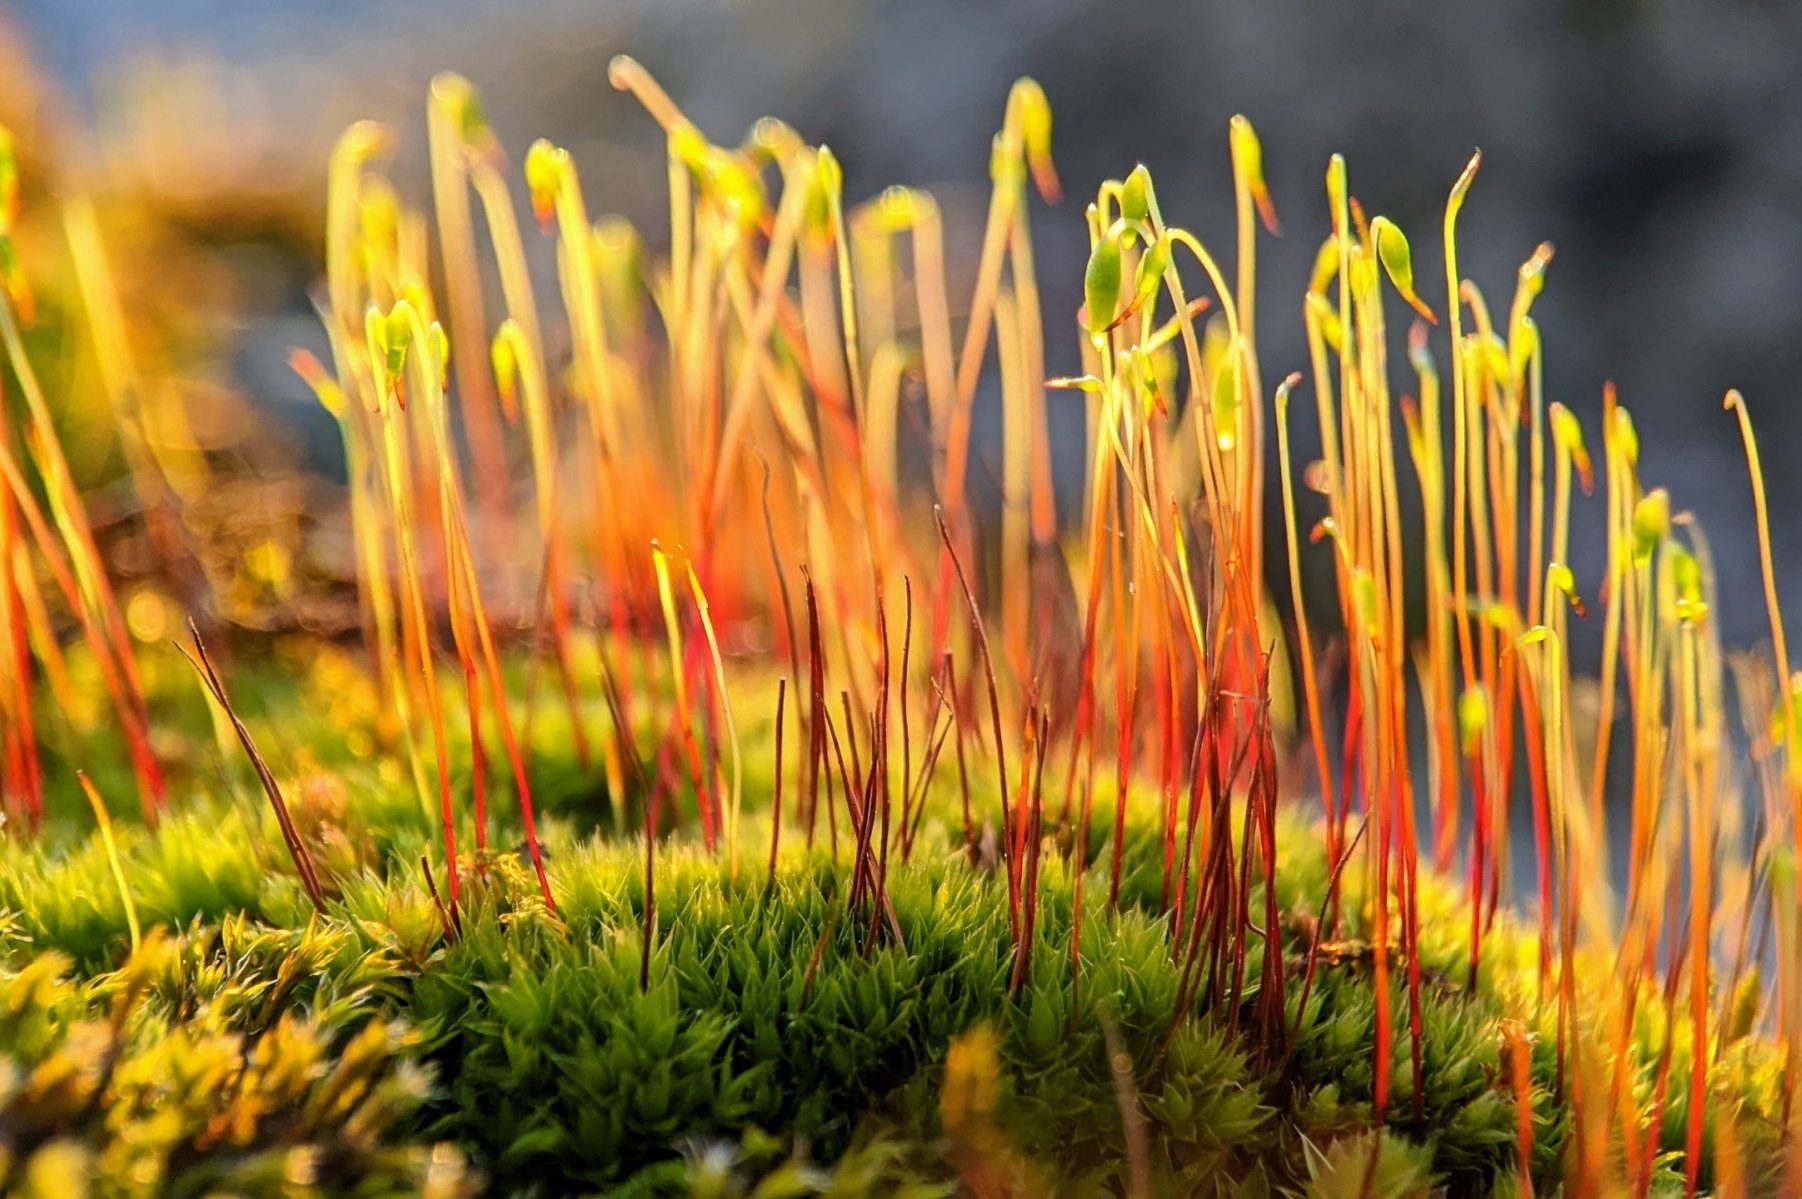 in an article about scientific research, moss and plants on a rock